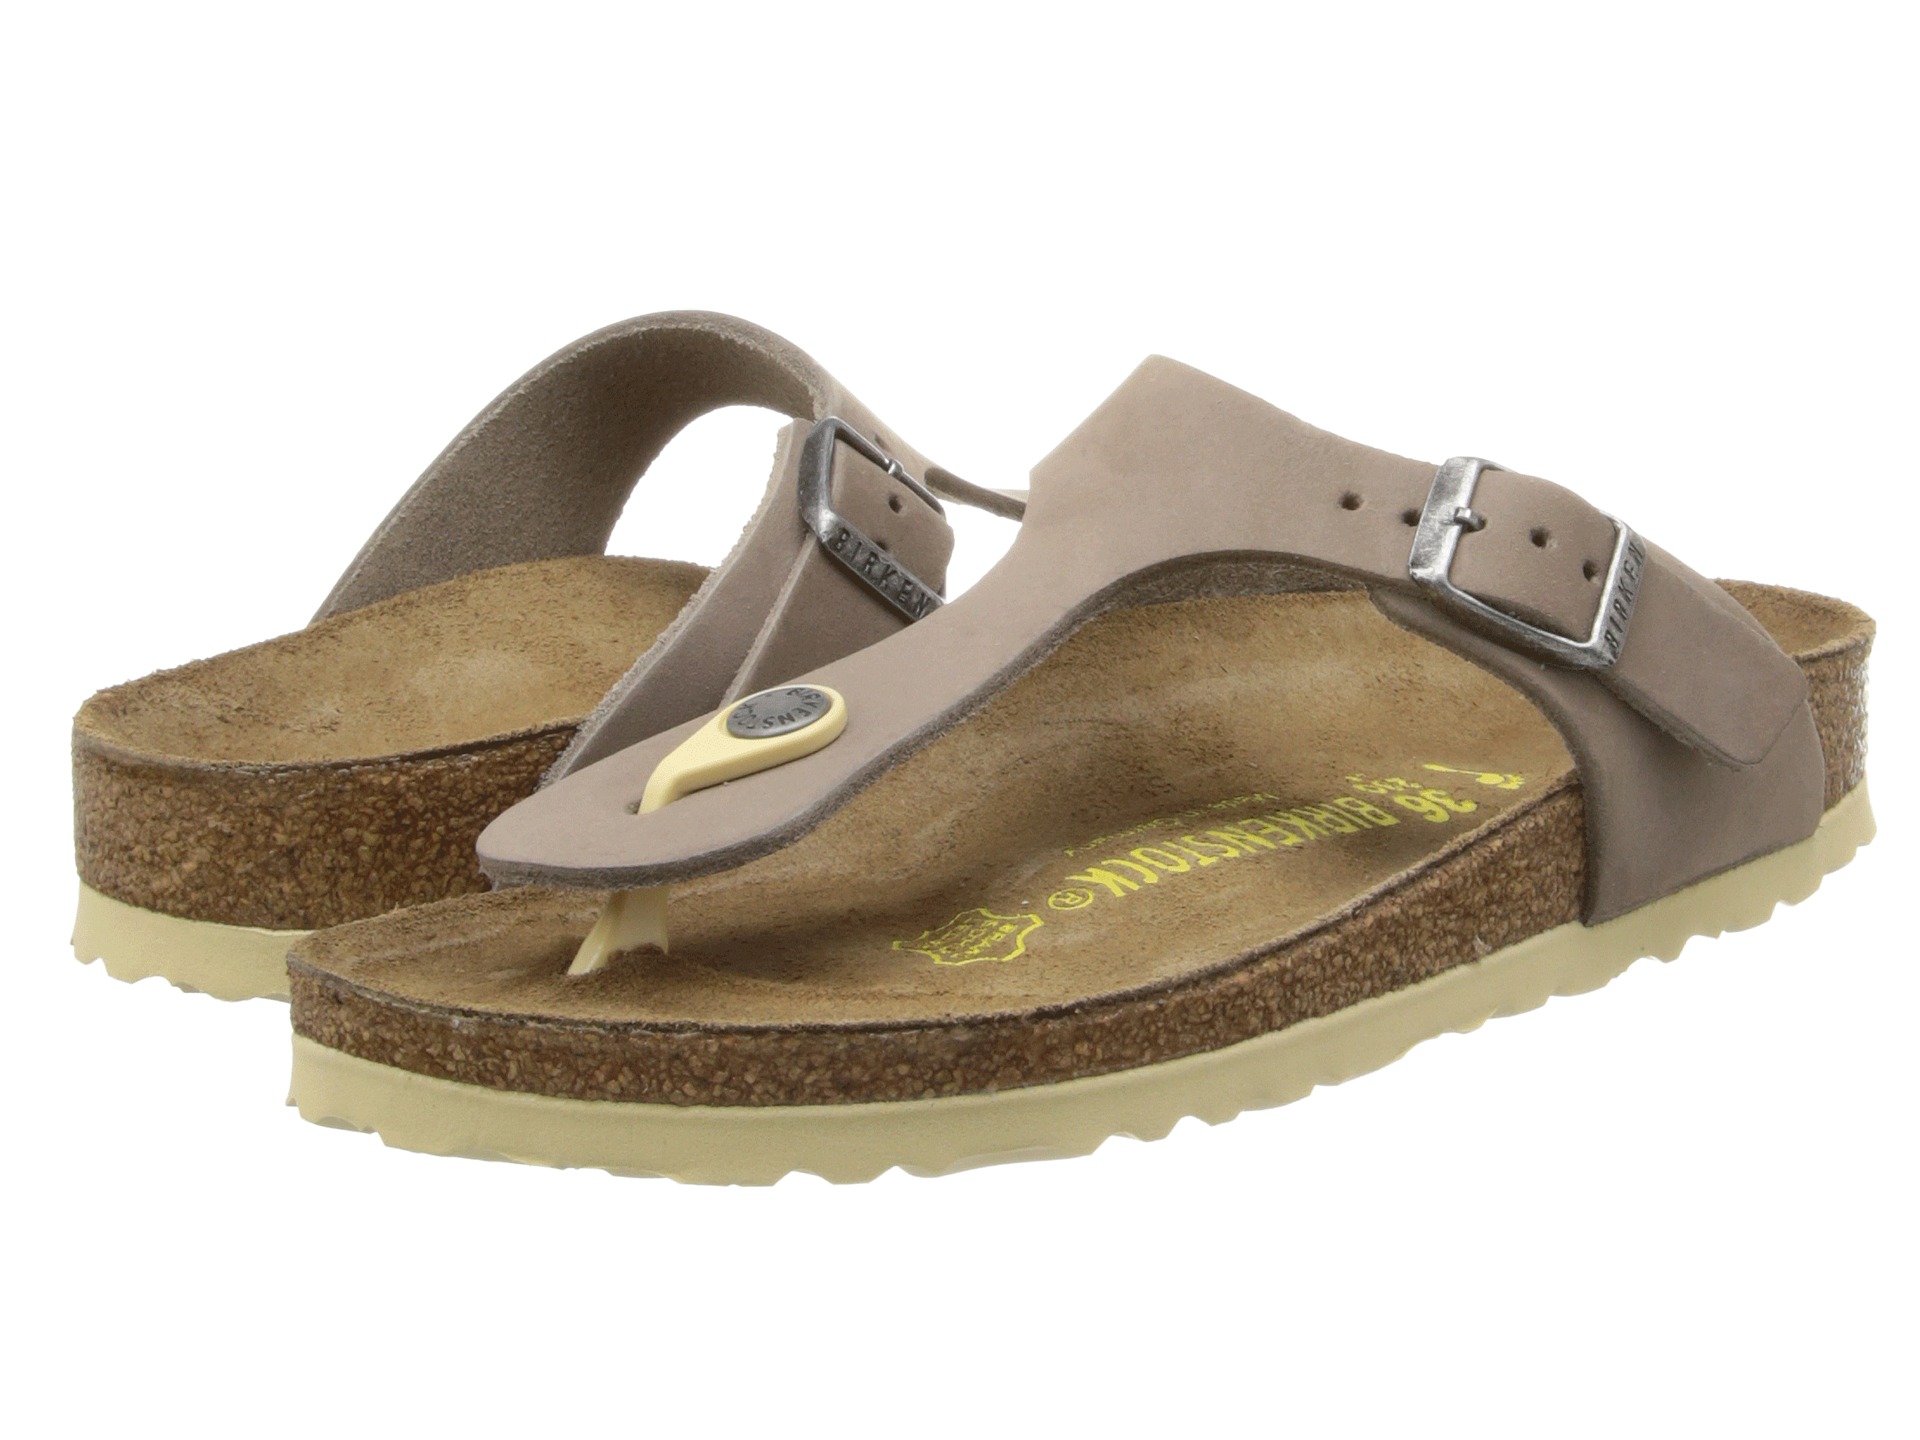 Birkenstock Gizeh Caibou Nubuck, Shoes | Shipped Free at Zappos